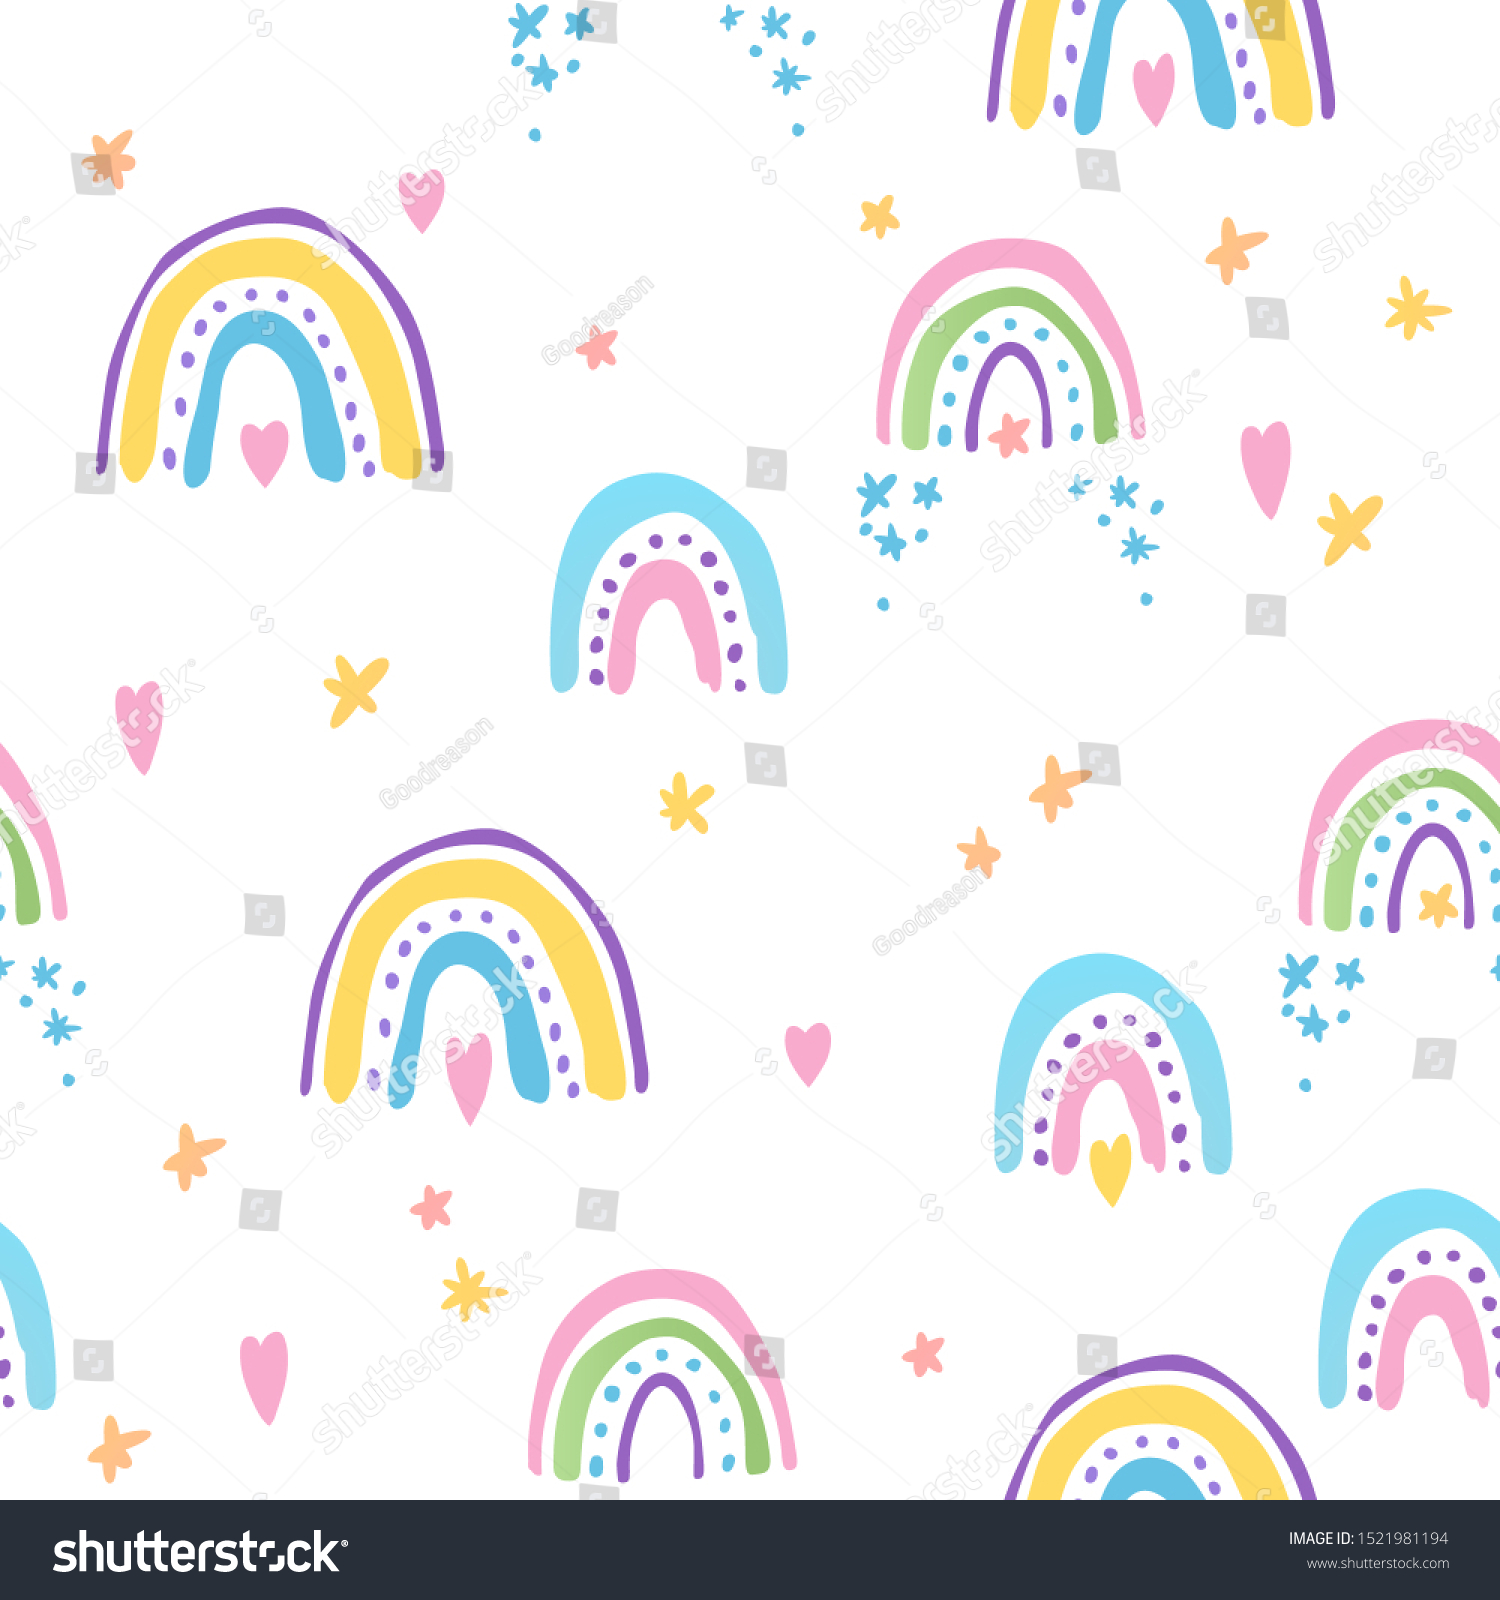 Seamless pattern with colorful rainbows.
 #1521981194